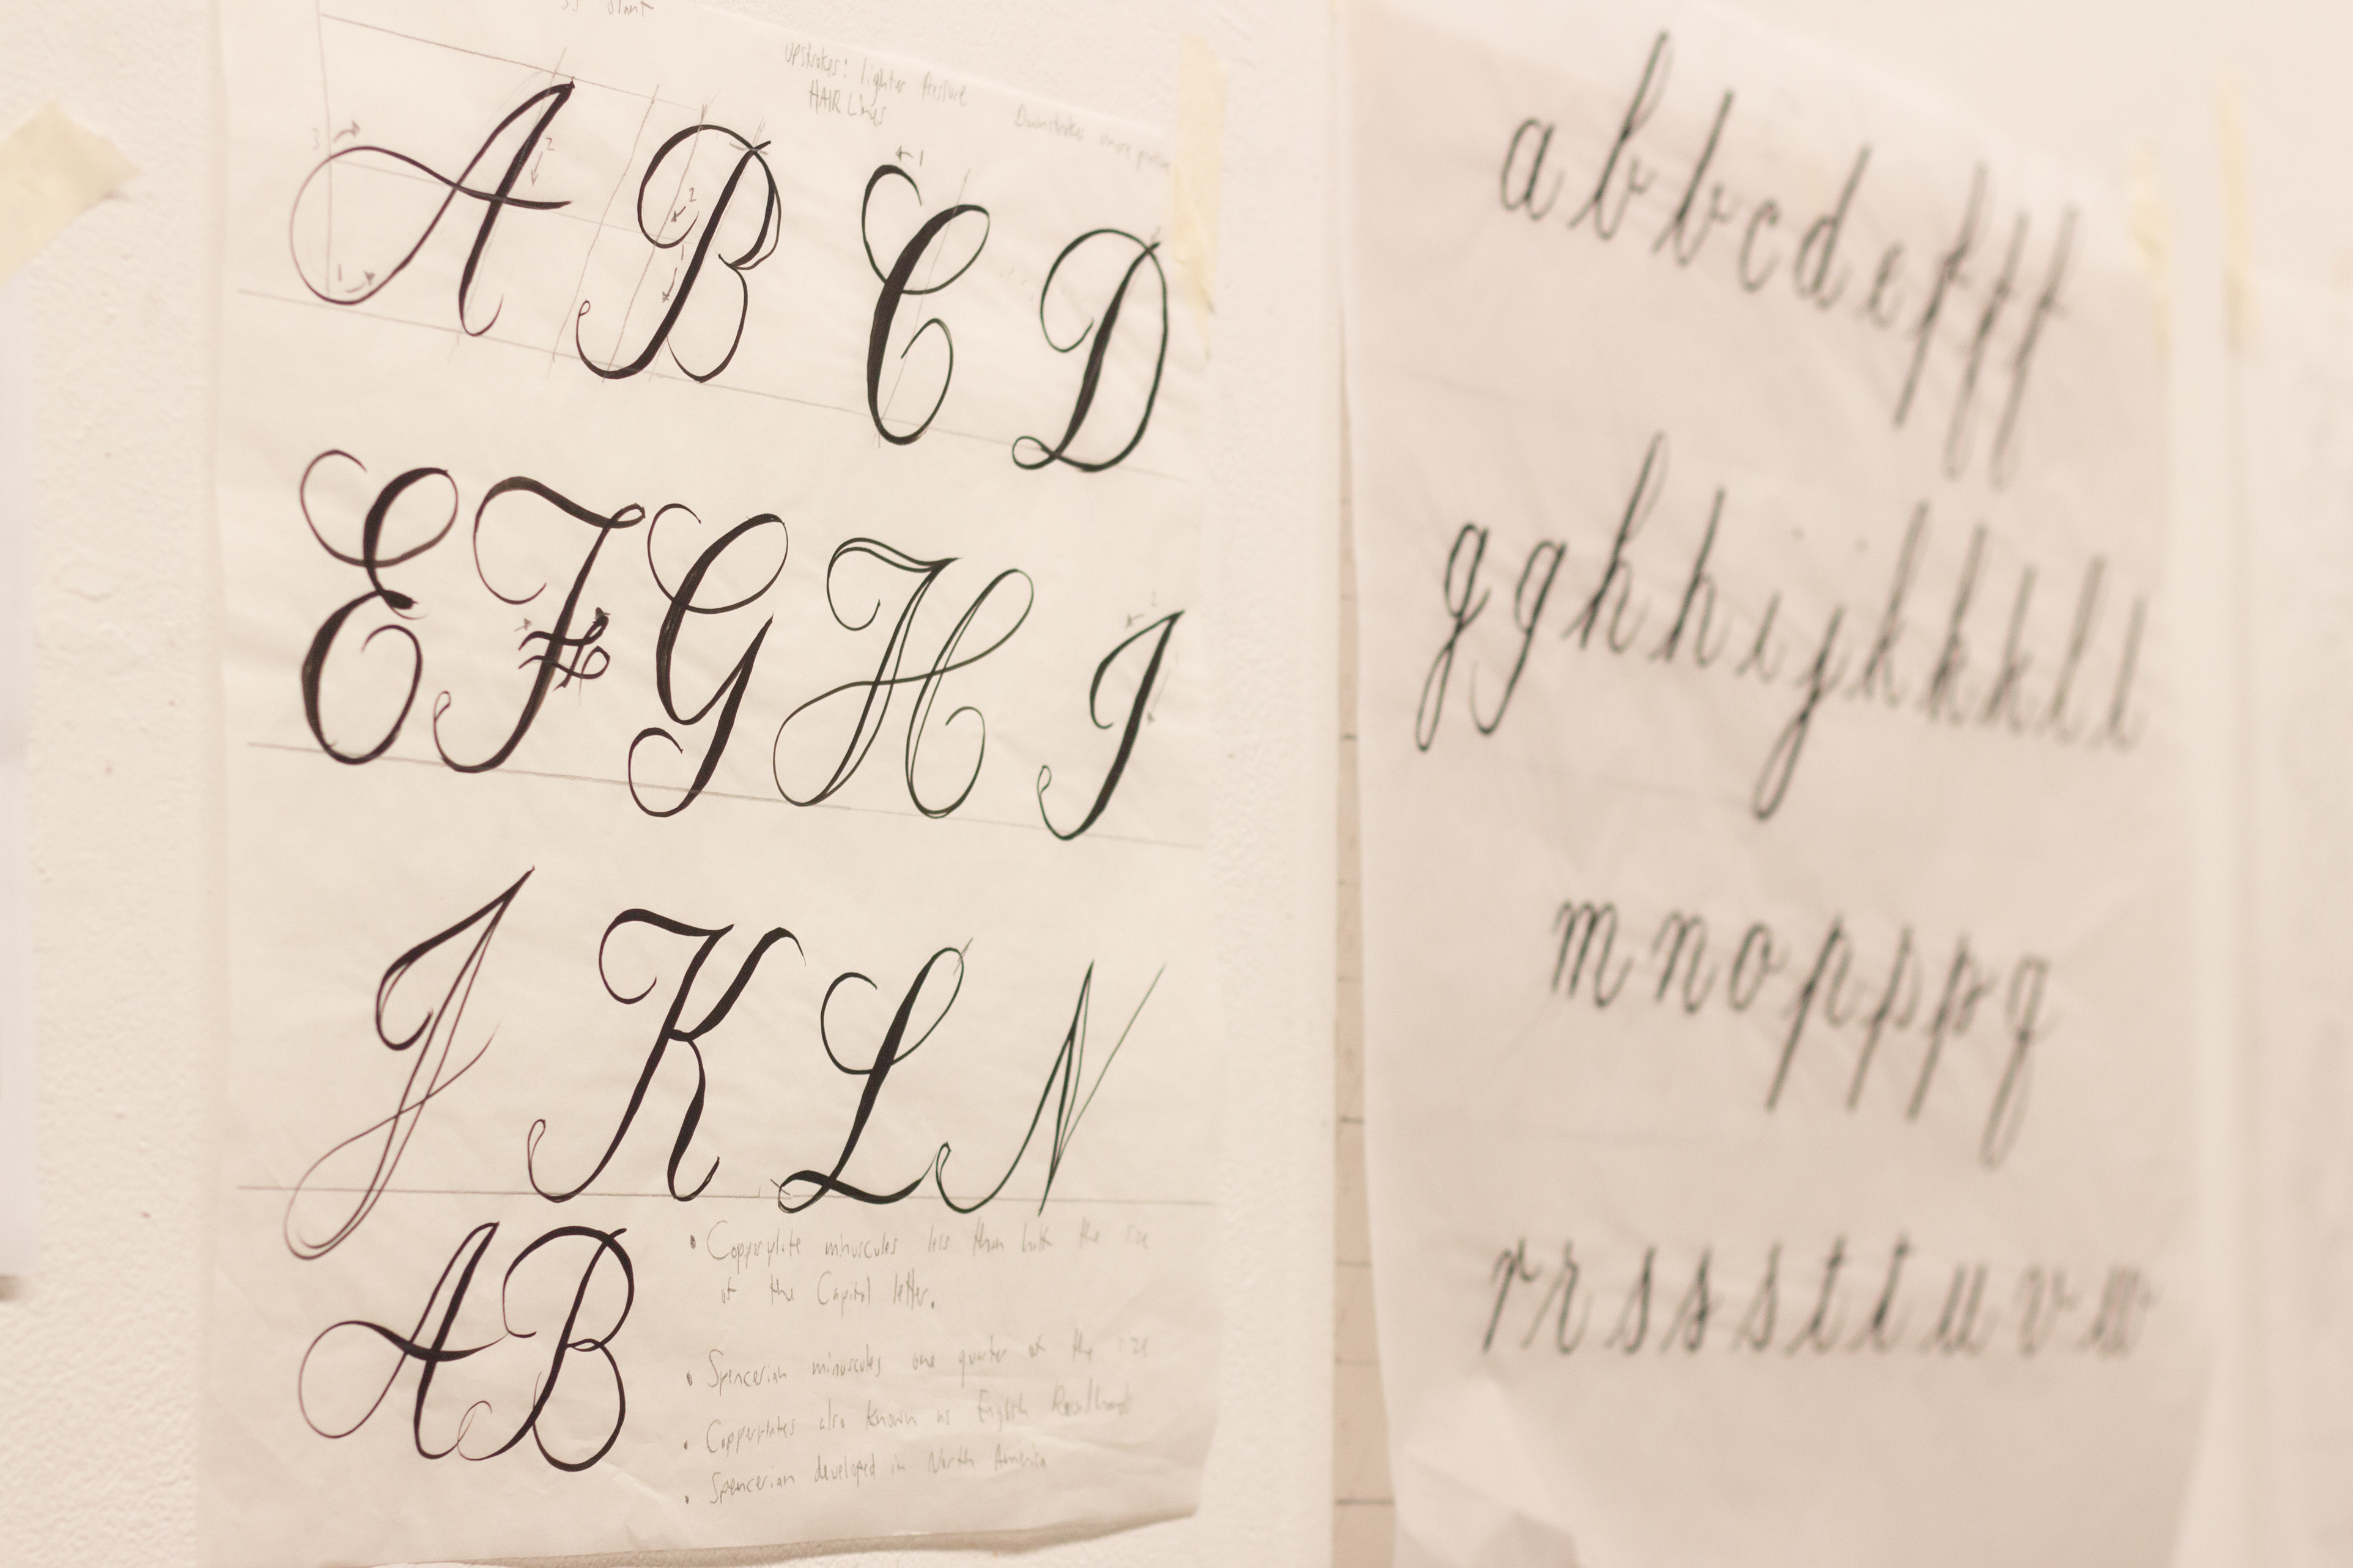 A picture of letters written in calligraphy.